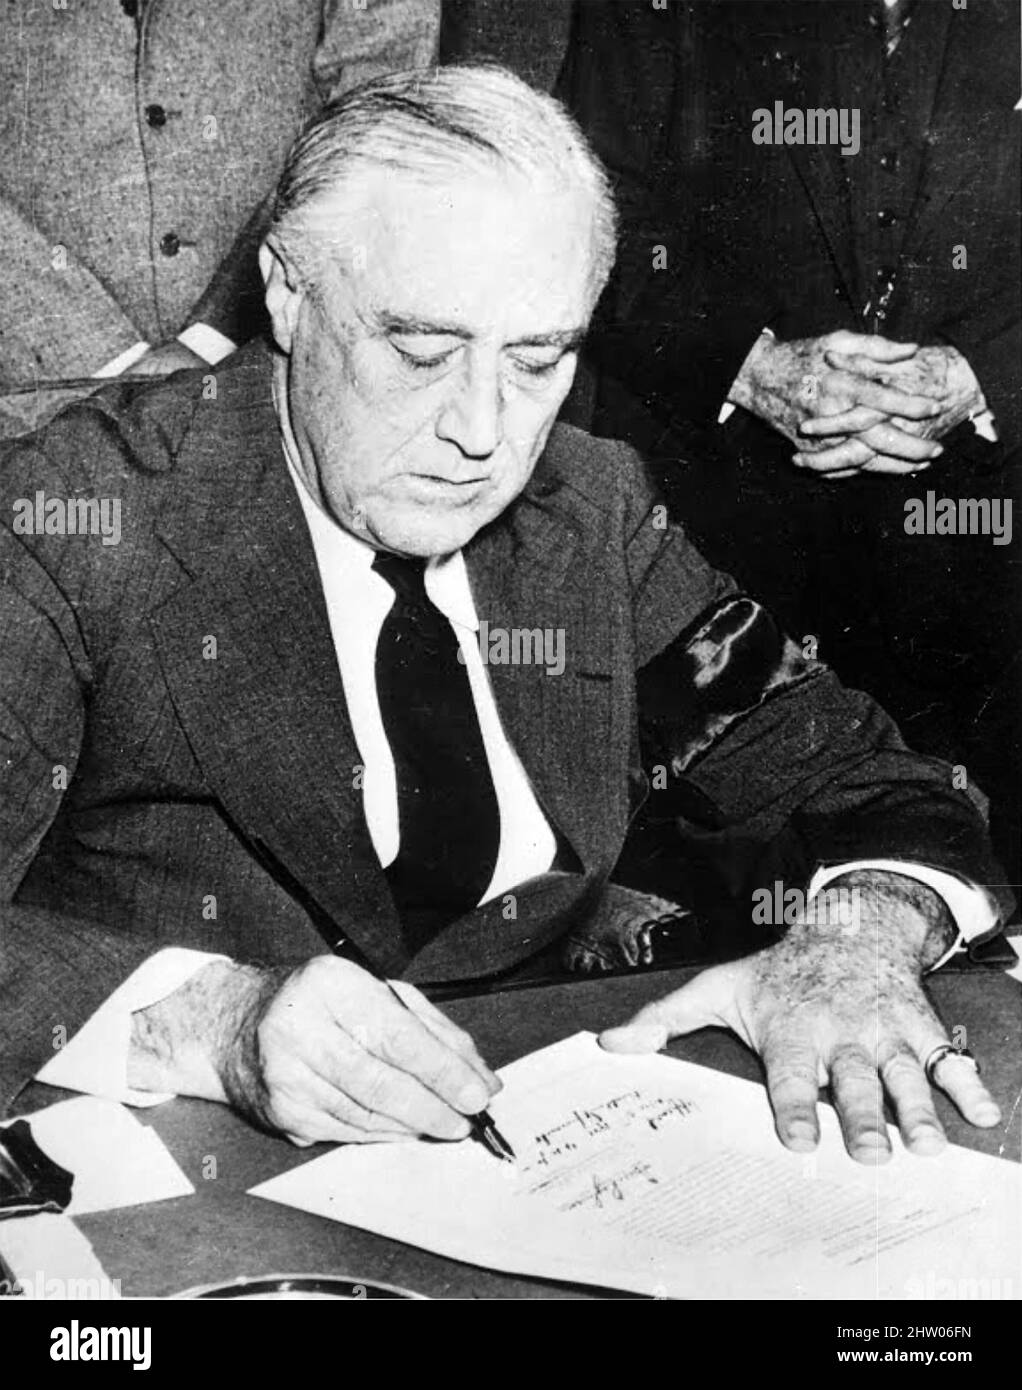 FRANKLIN D. ROOSEVELT (1882-1945) American President in signs the declaration of war on Japan on 8 December 1941. Stock Photo